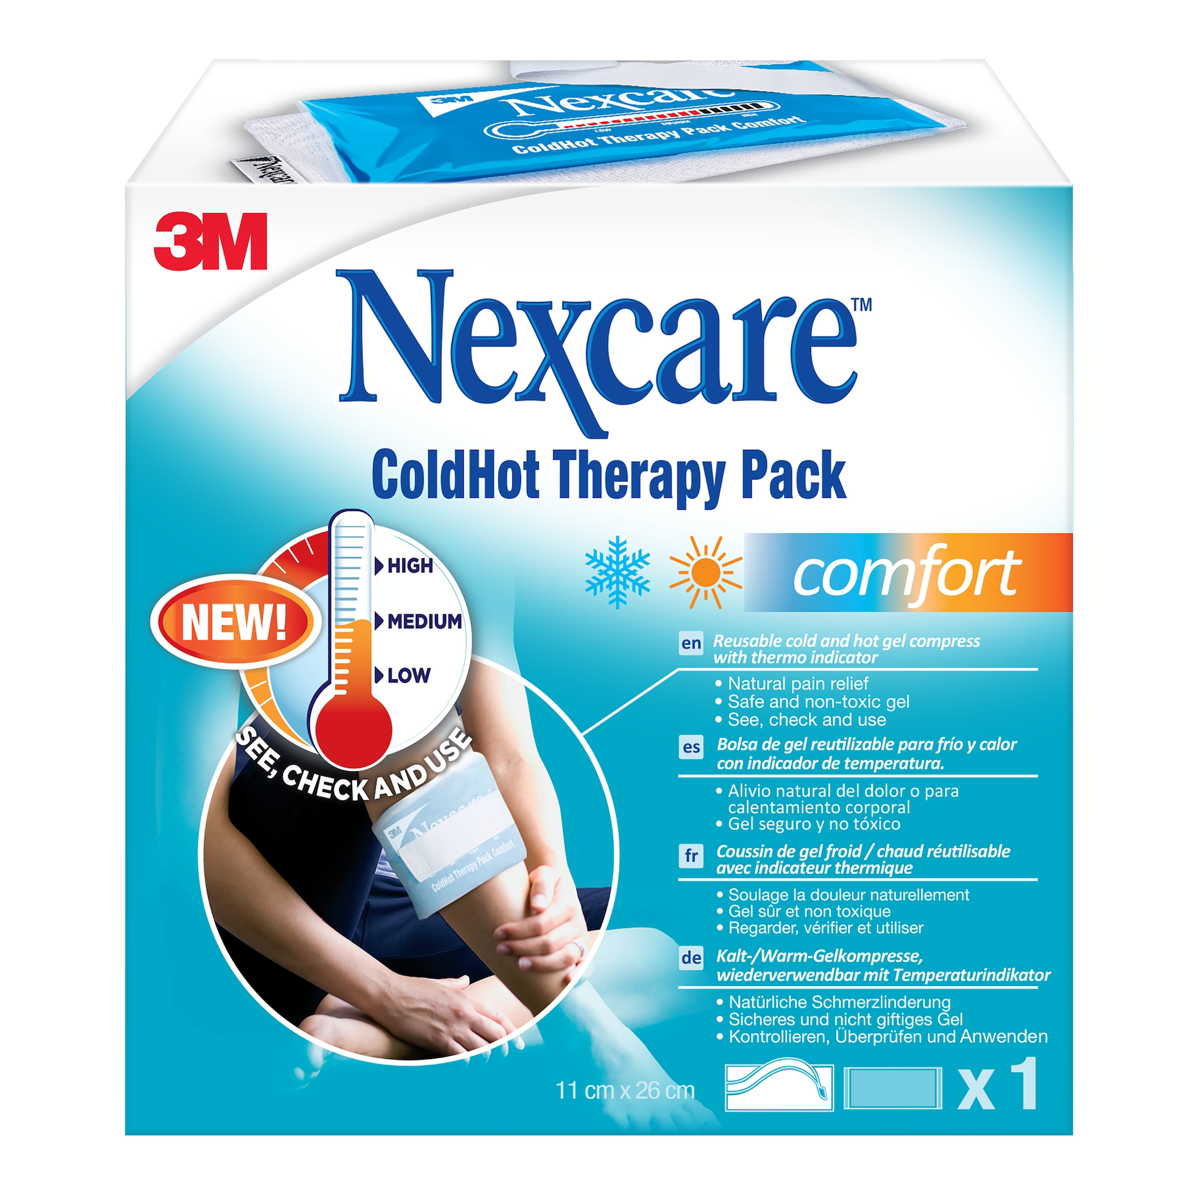 3M Nexcare ColdHot Therapy Pack mit Thermoindikator